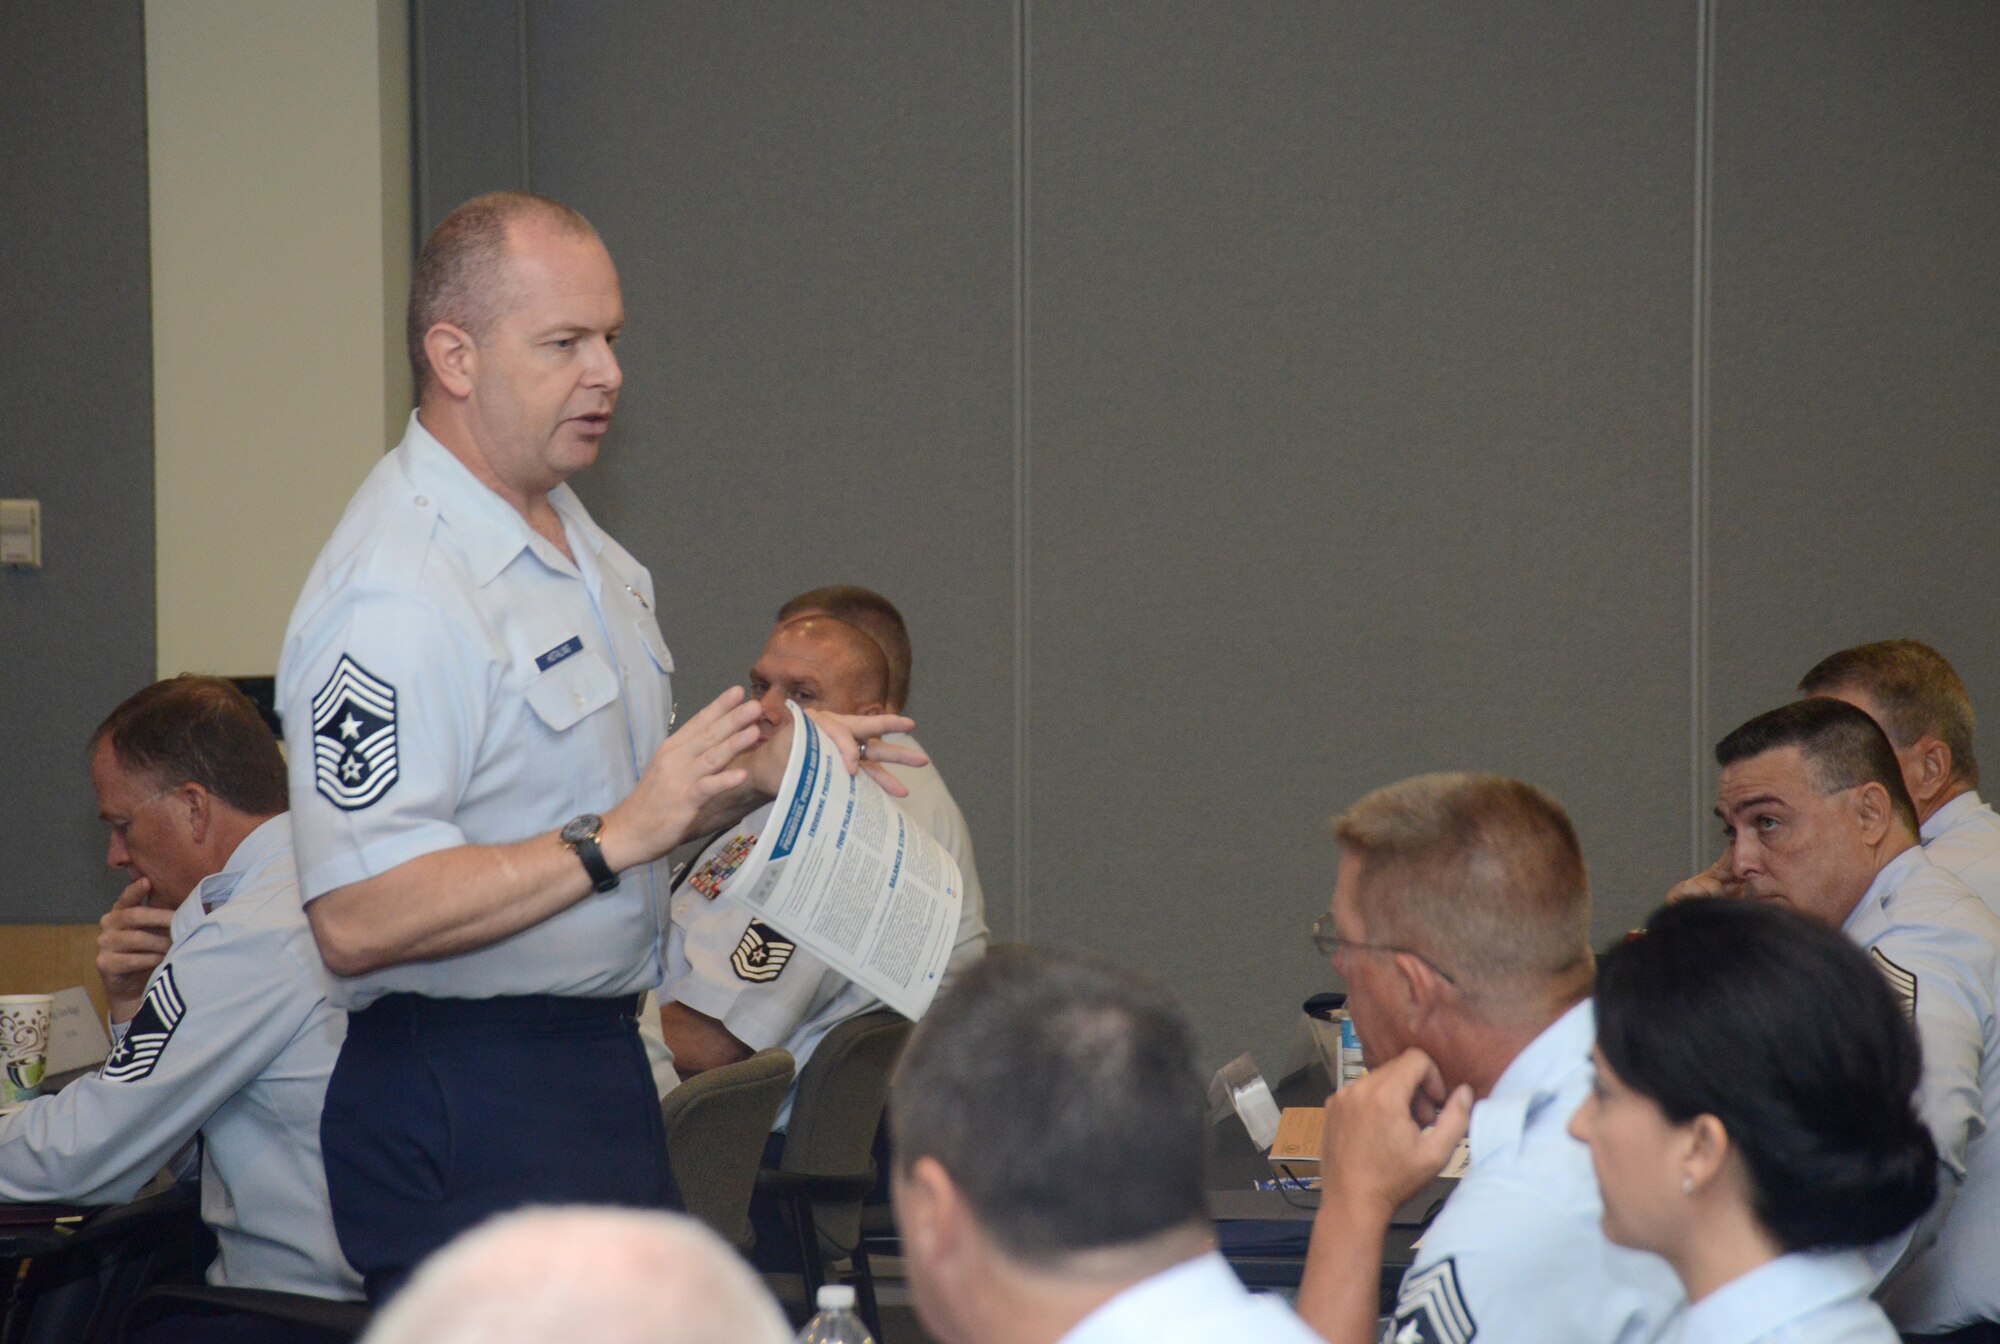 Air National Guard Command Chief James W. Hotaling discusses his Aim Points with the Chief's Executive Course at the Air National Guard Readiness Center on Joint Base Andrews, Md. The course, part of Focus on the Force Week, is designed to introduce newly-promoted chief master sergeants to their new roles. (U.S. Air National Guard photo by Senior Airman John E. Hillier/Released)